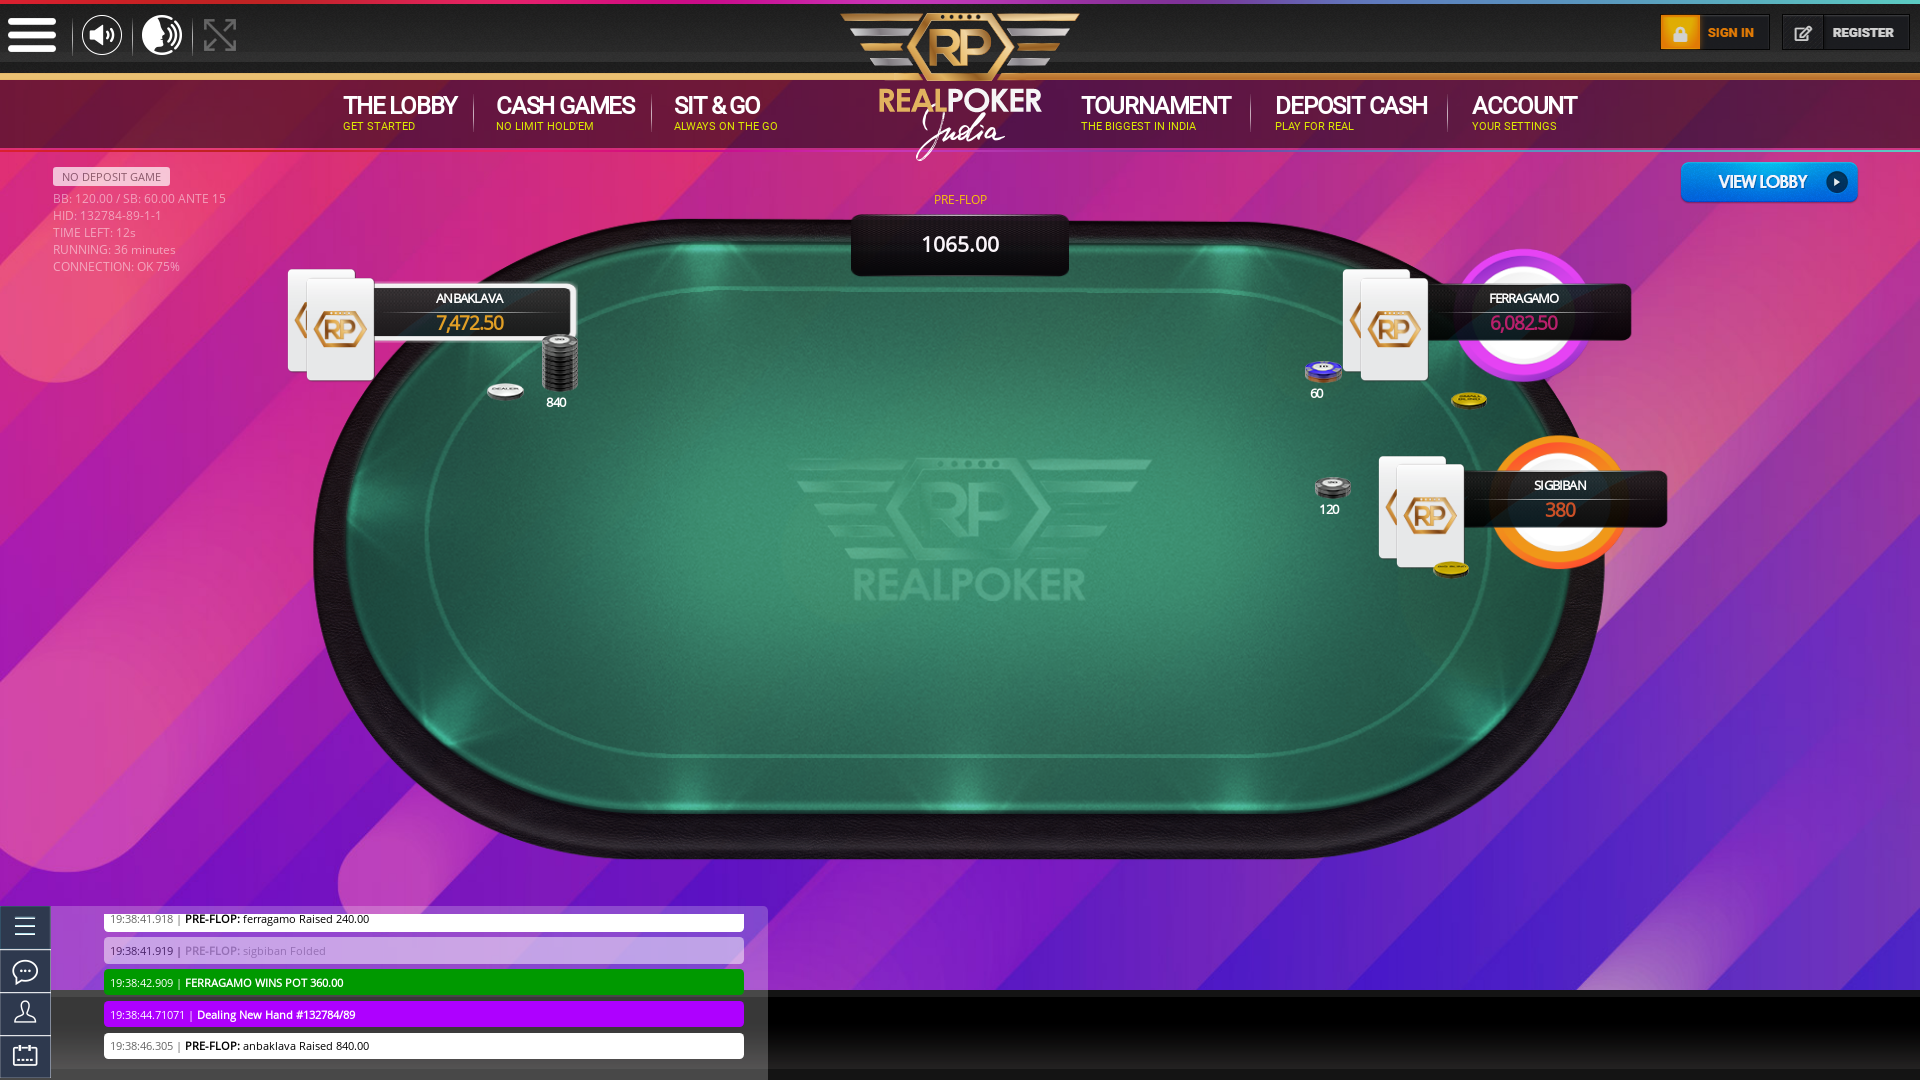 Online poker on a 10 player table in the 36th minute match up